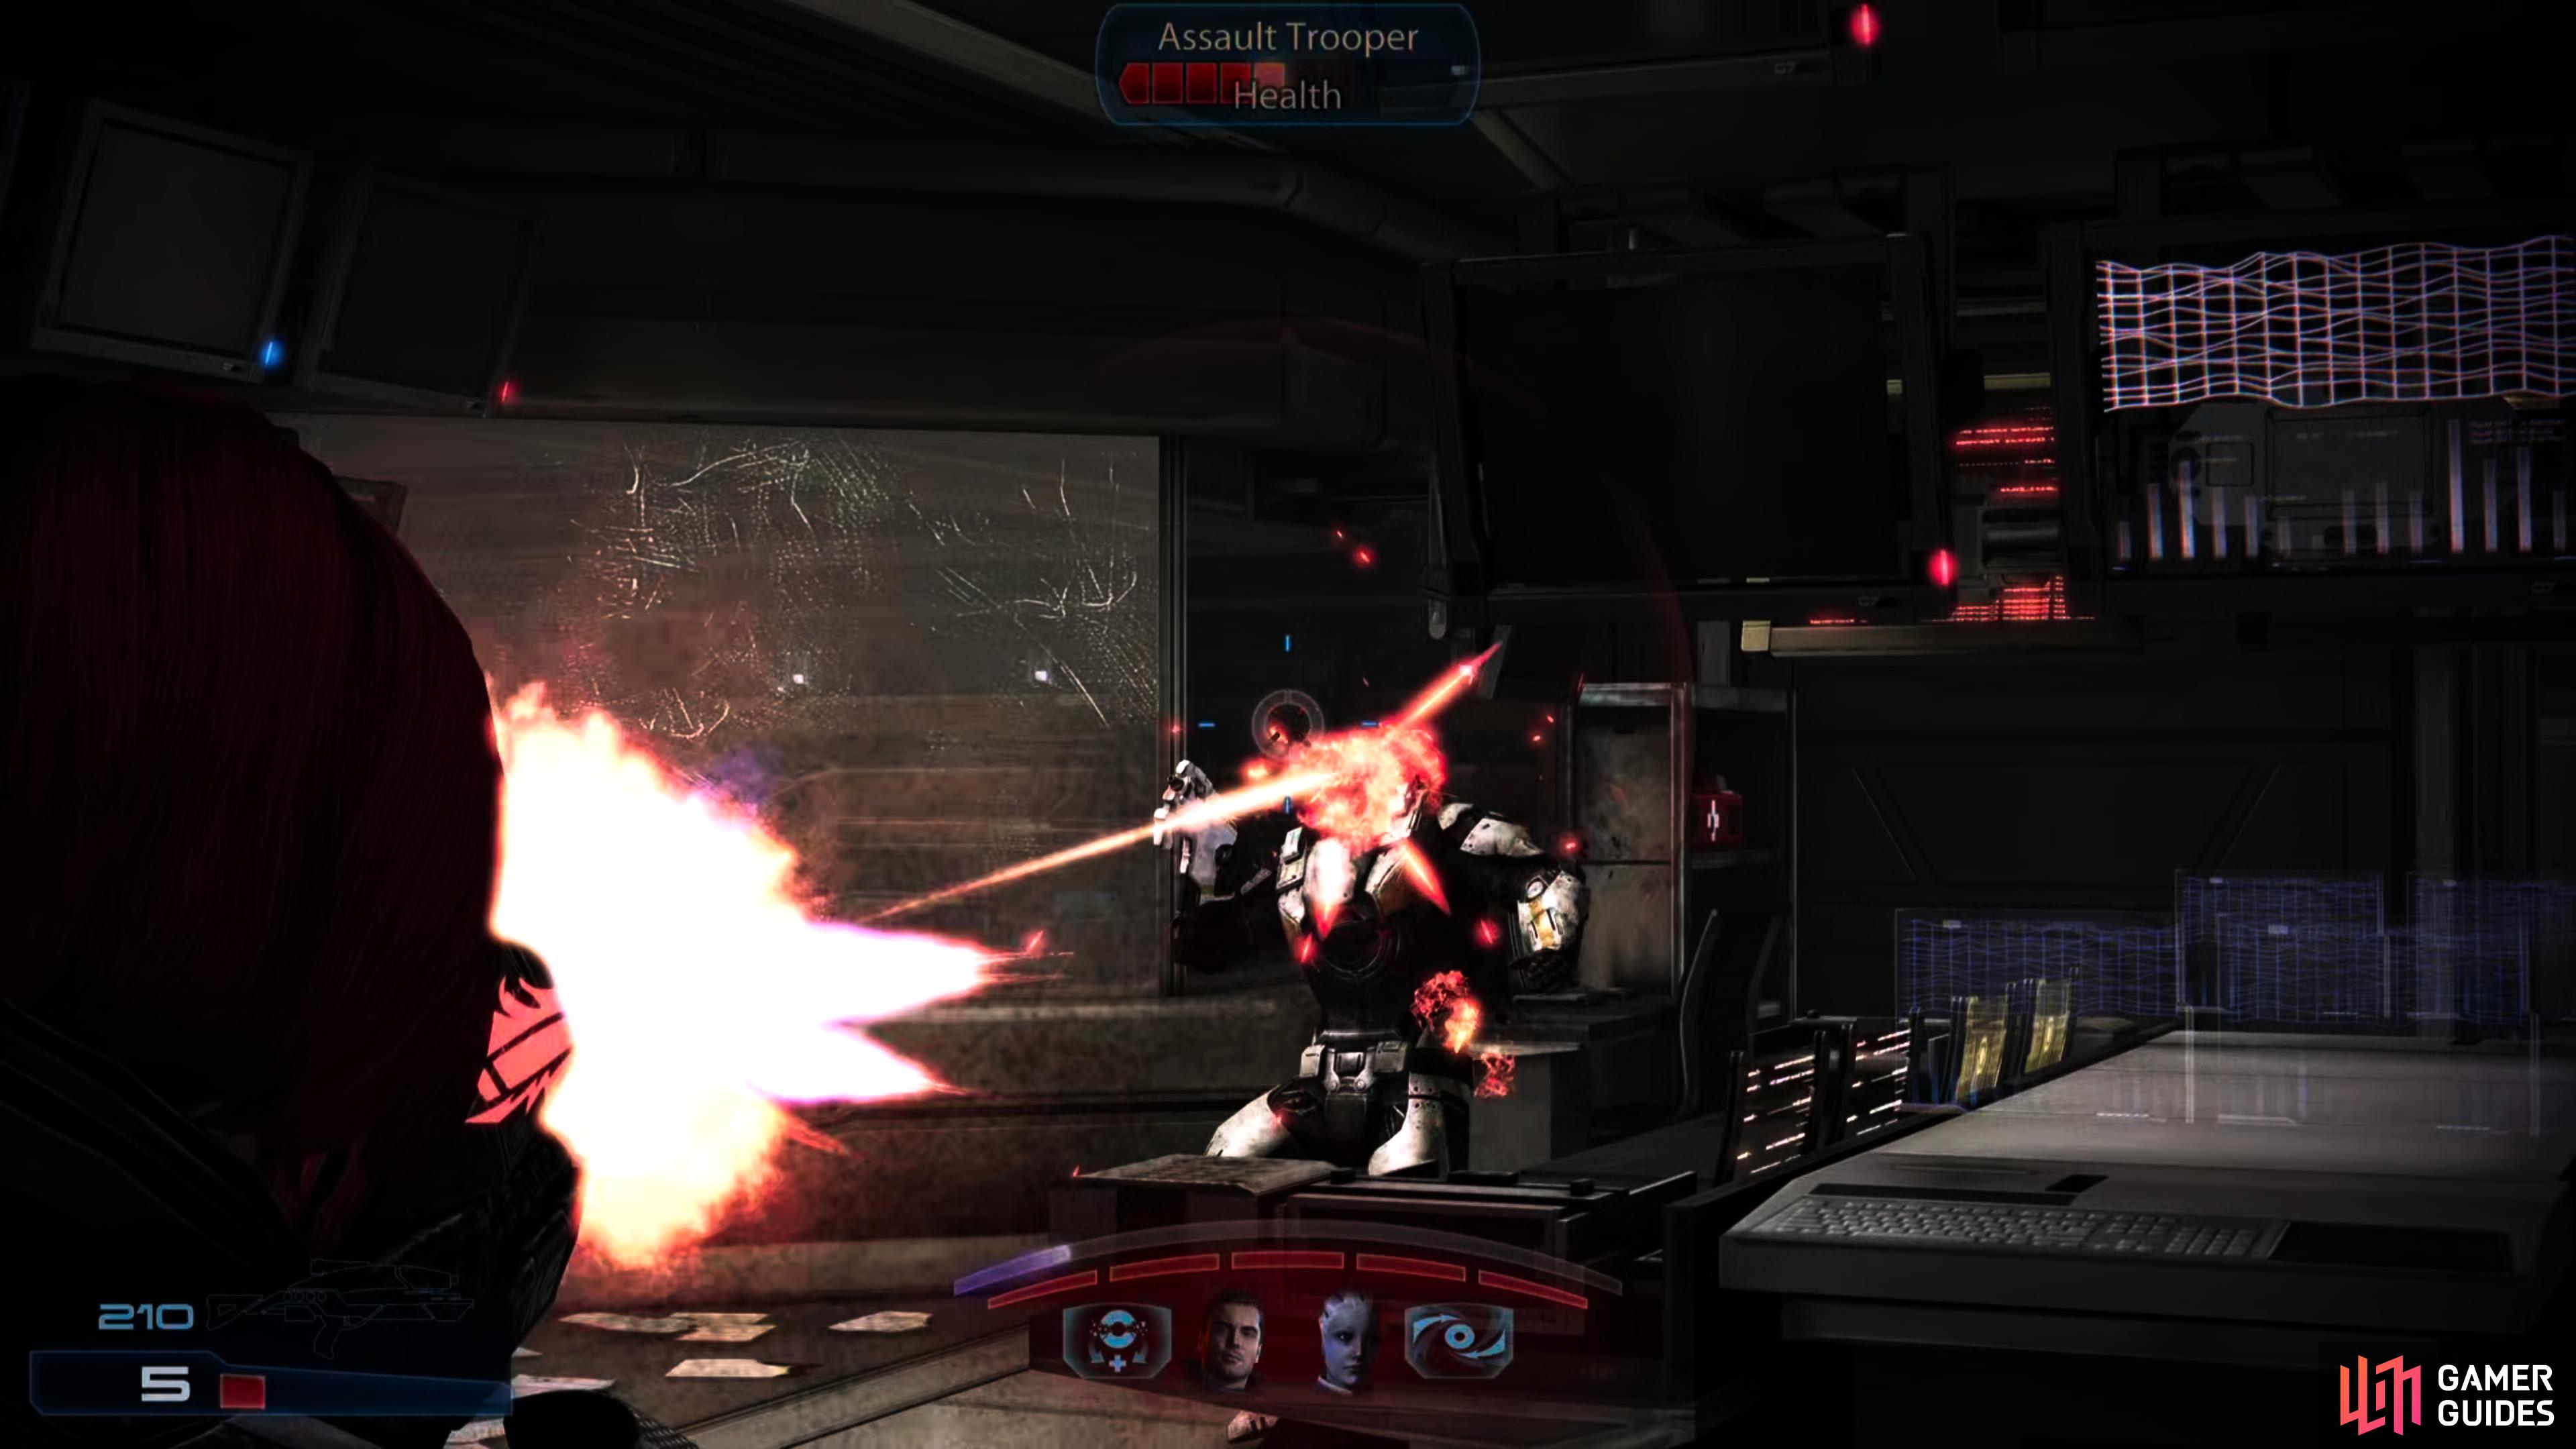 Once you get around the turret, it'll deactivate, allowing you to focus on the Cerberus troopers in the control room.